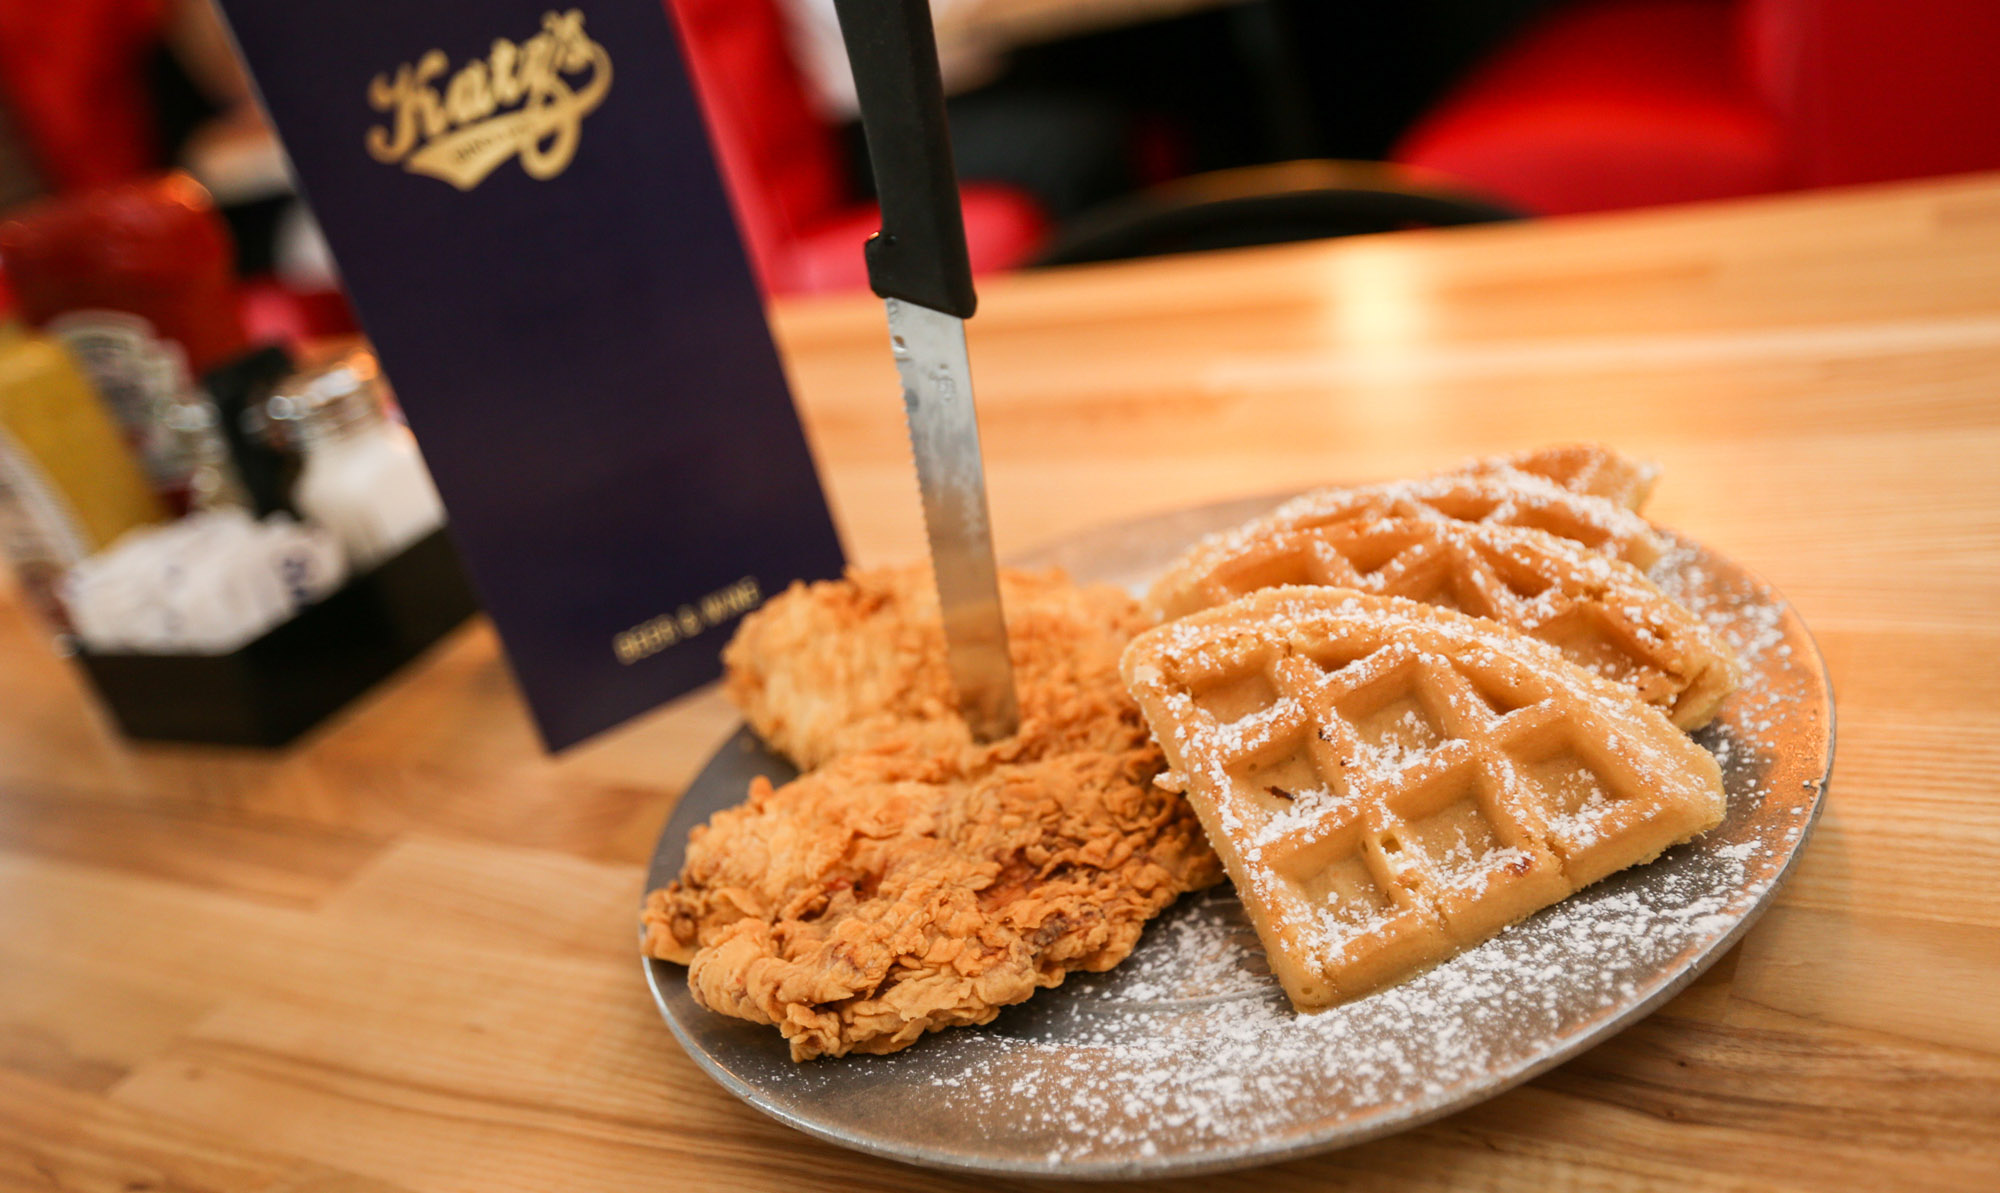 Fried chicken and waffles at Katz's Deli Houston